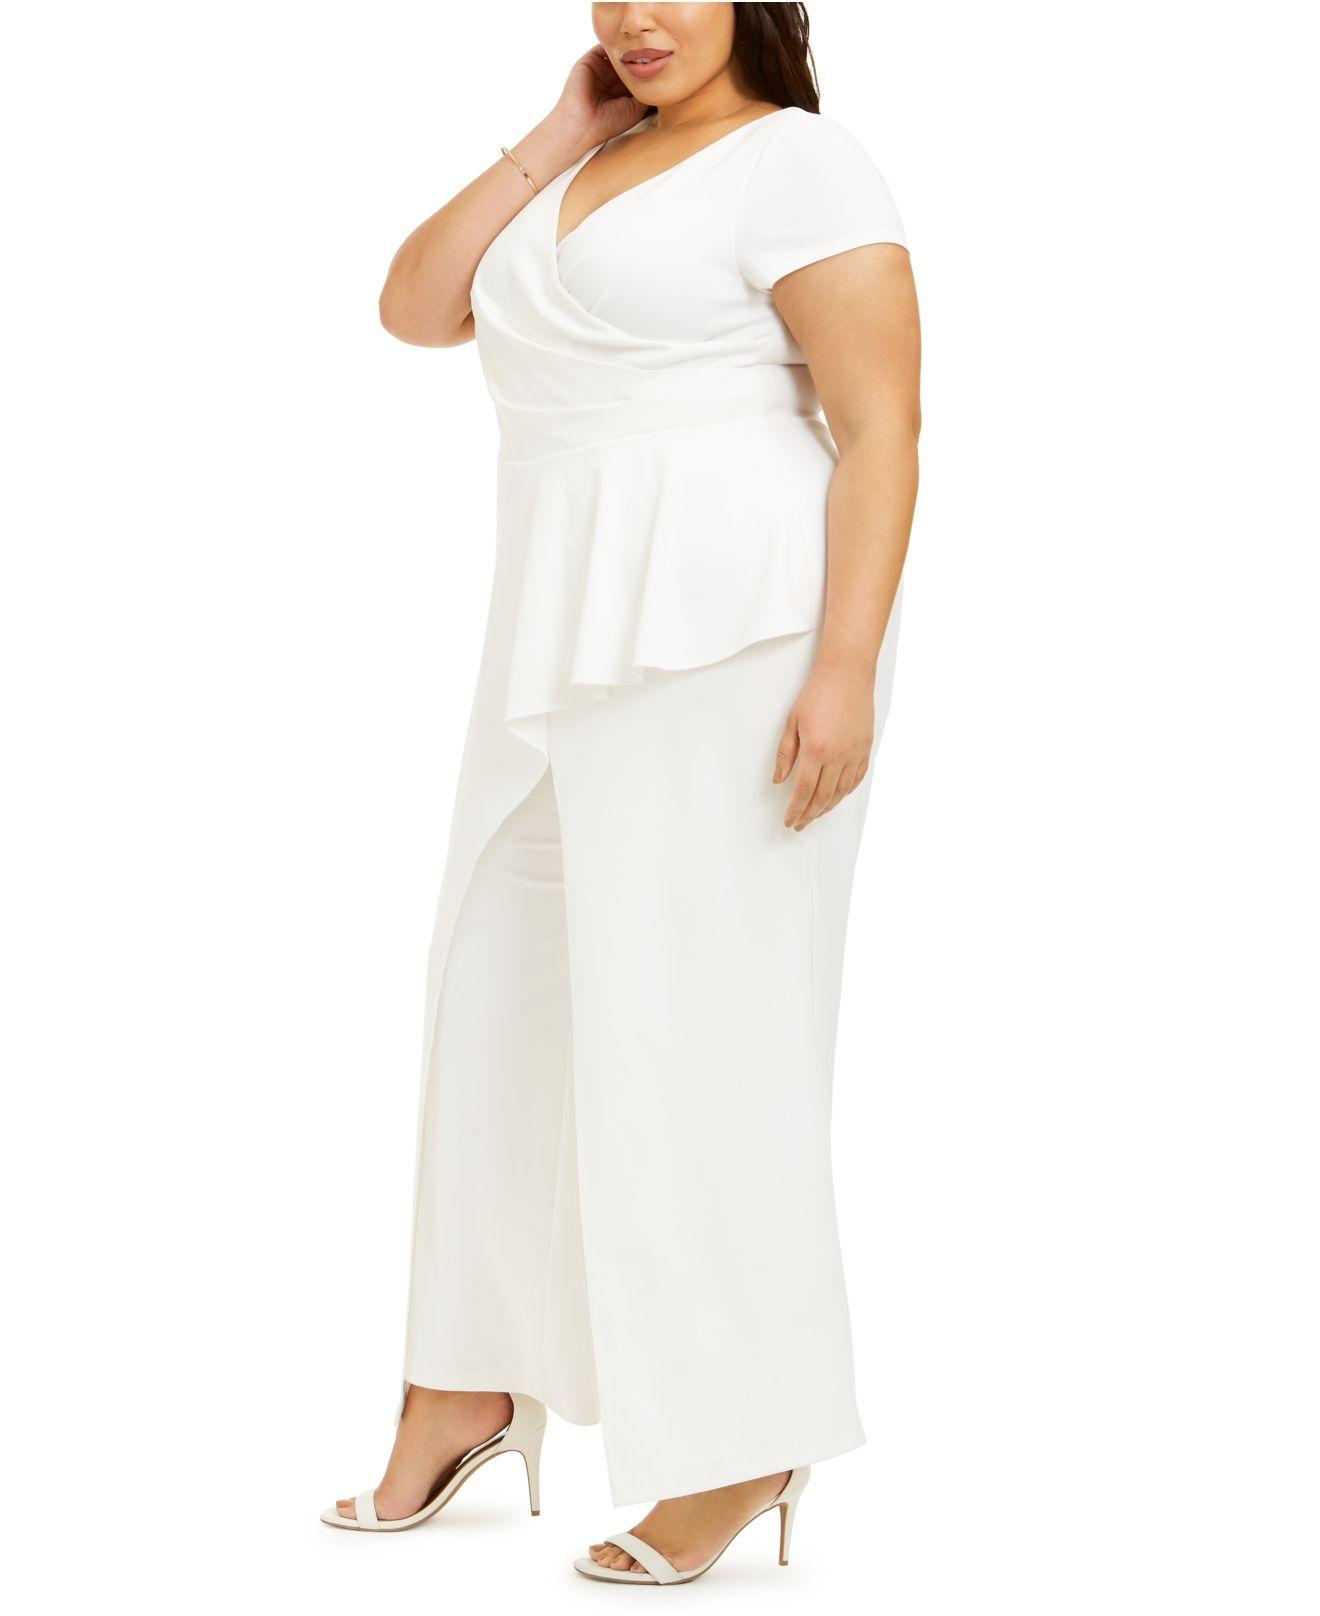 Adrianna Papell Synthetic Plus Size Peplum Jumpsuit in Ivory (White) - Lyst